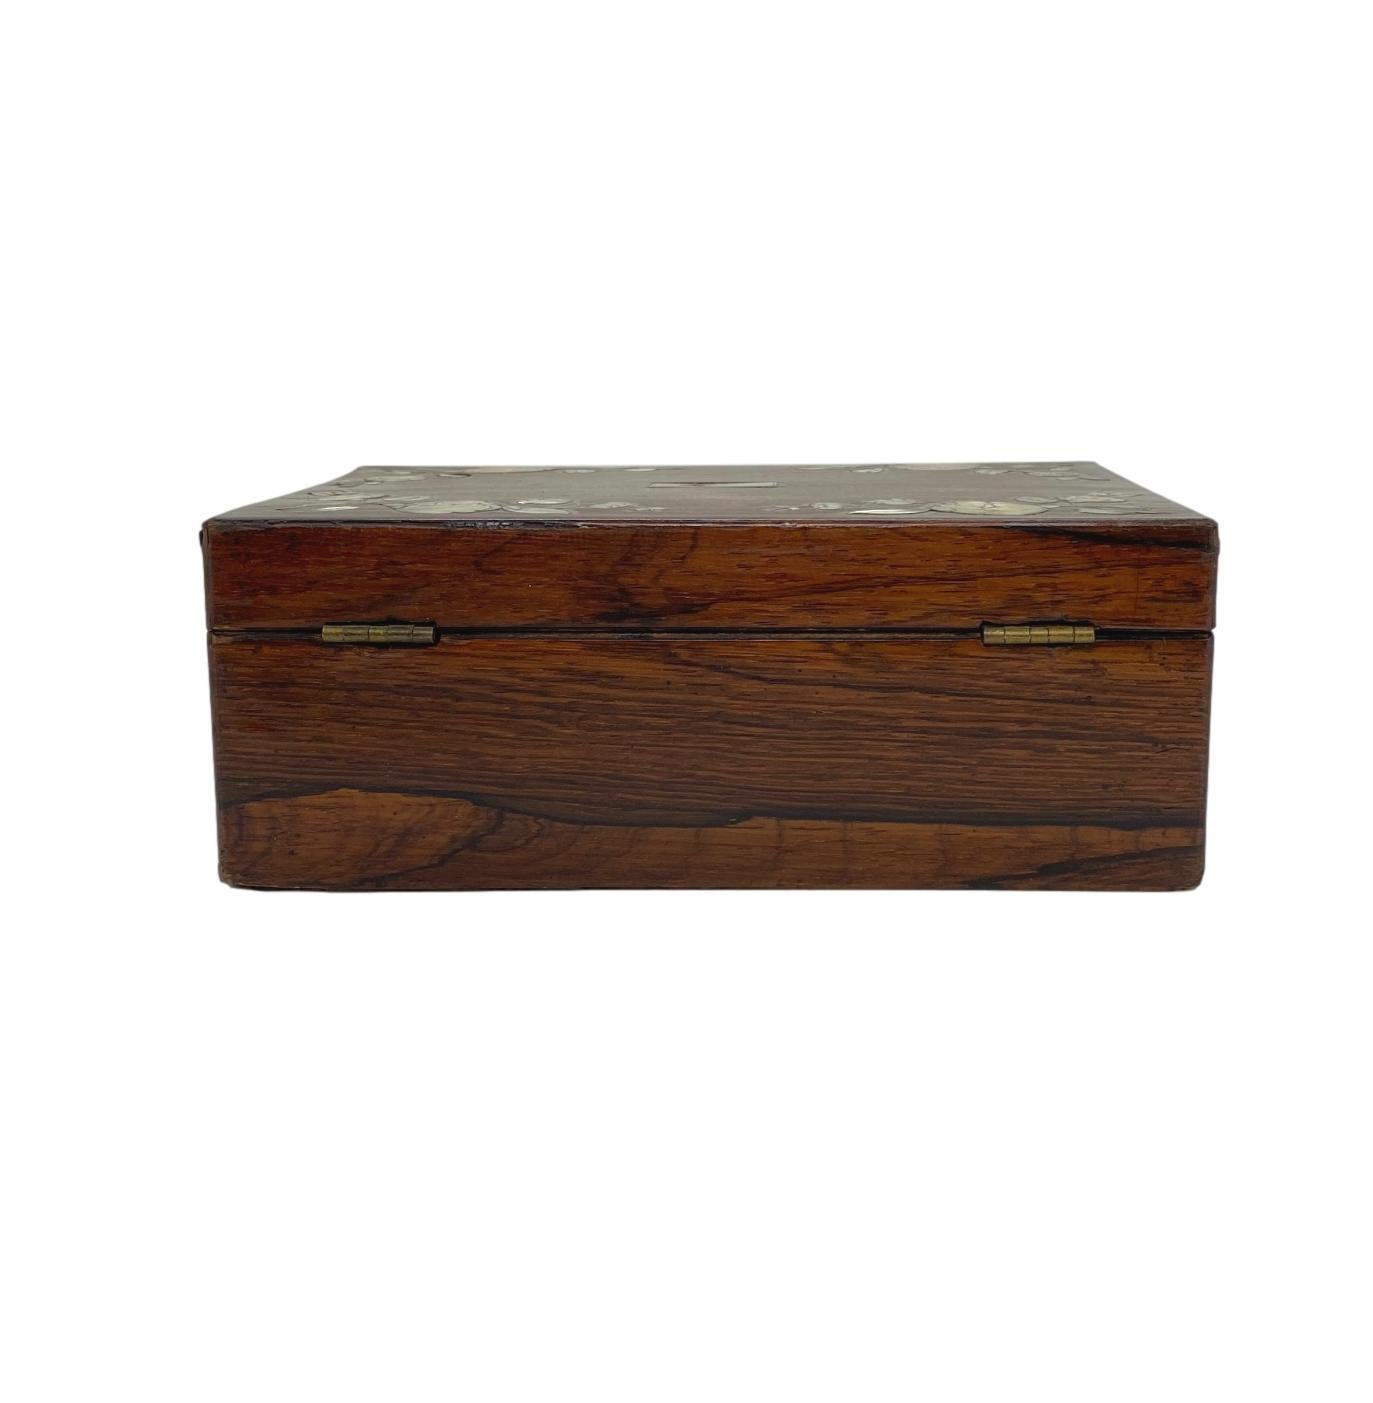 Hand-Crafted Rosewood Stationery Box with Fine Inlaid Mother of Pearl Flowers, circa 1840